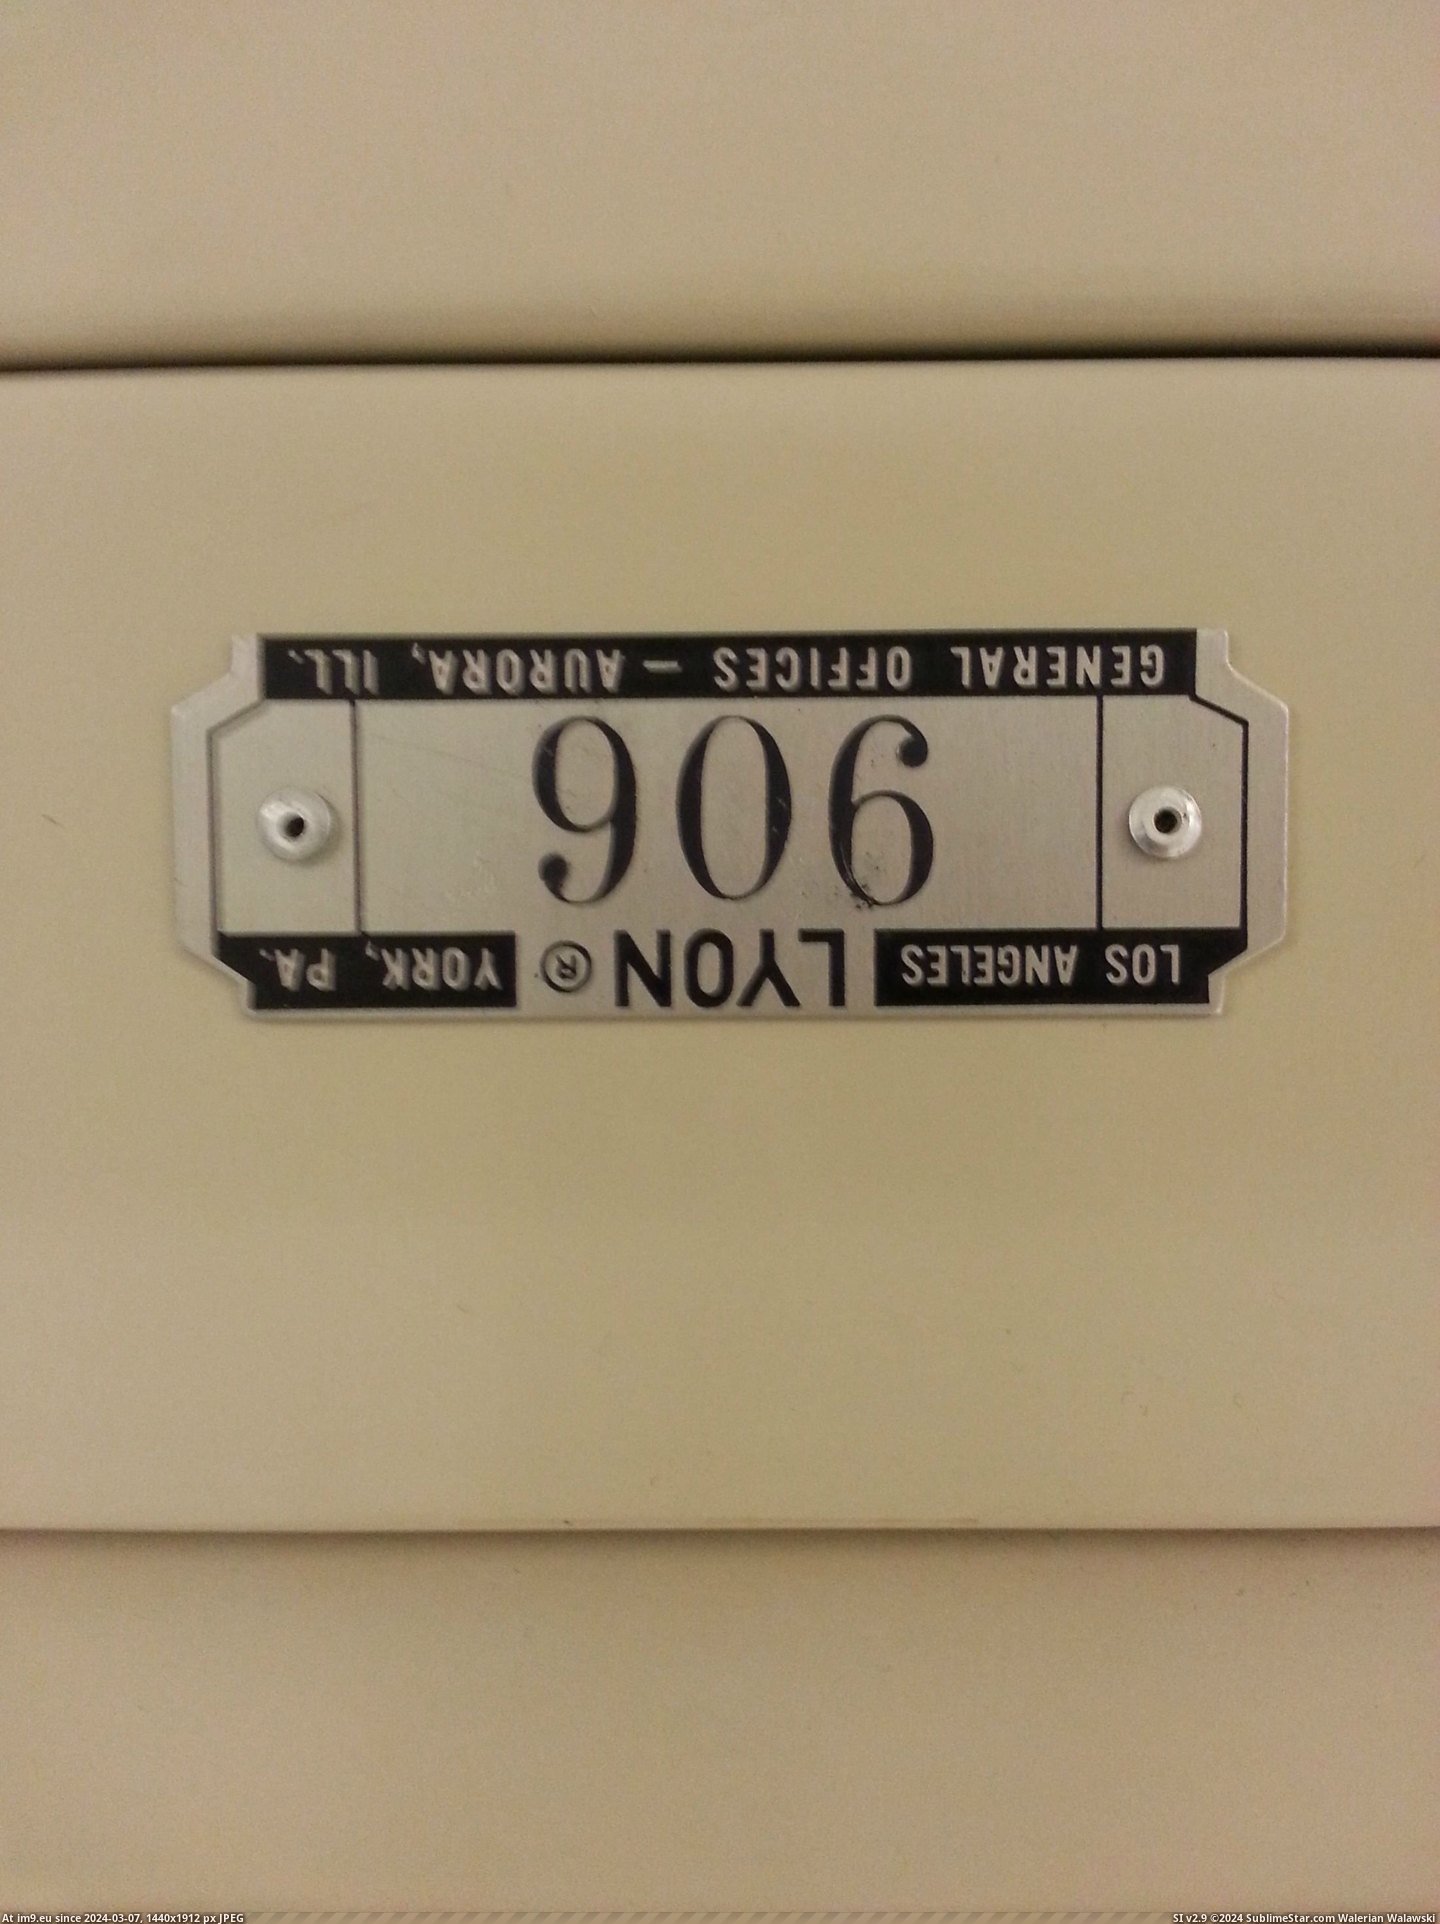 #Number #Upside #Plaque #Locker #Correct [Mildlyinteresting] The plaque on this locker is upside down but the number is still correct. Pic. (Obraz z album My r/MILDLYINTERESTING favs))